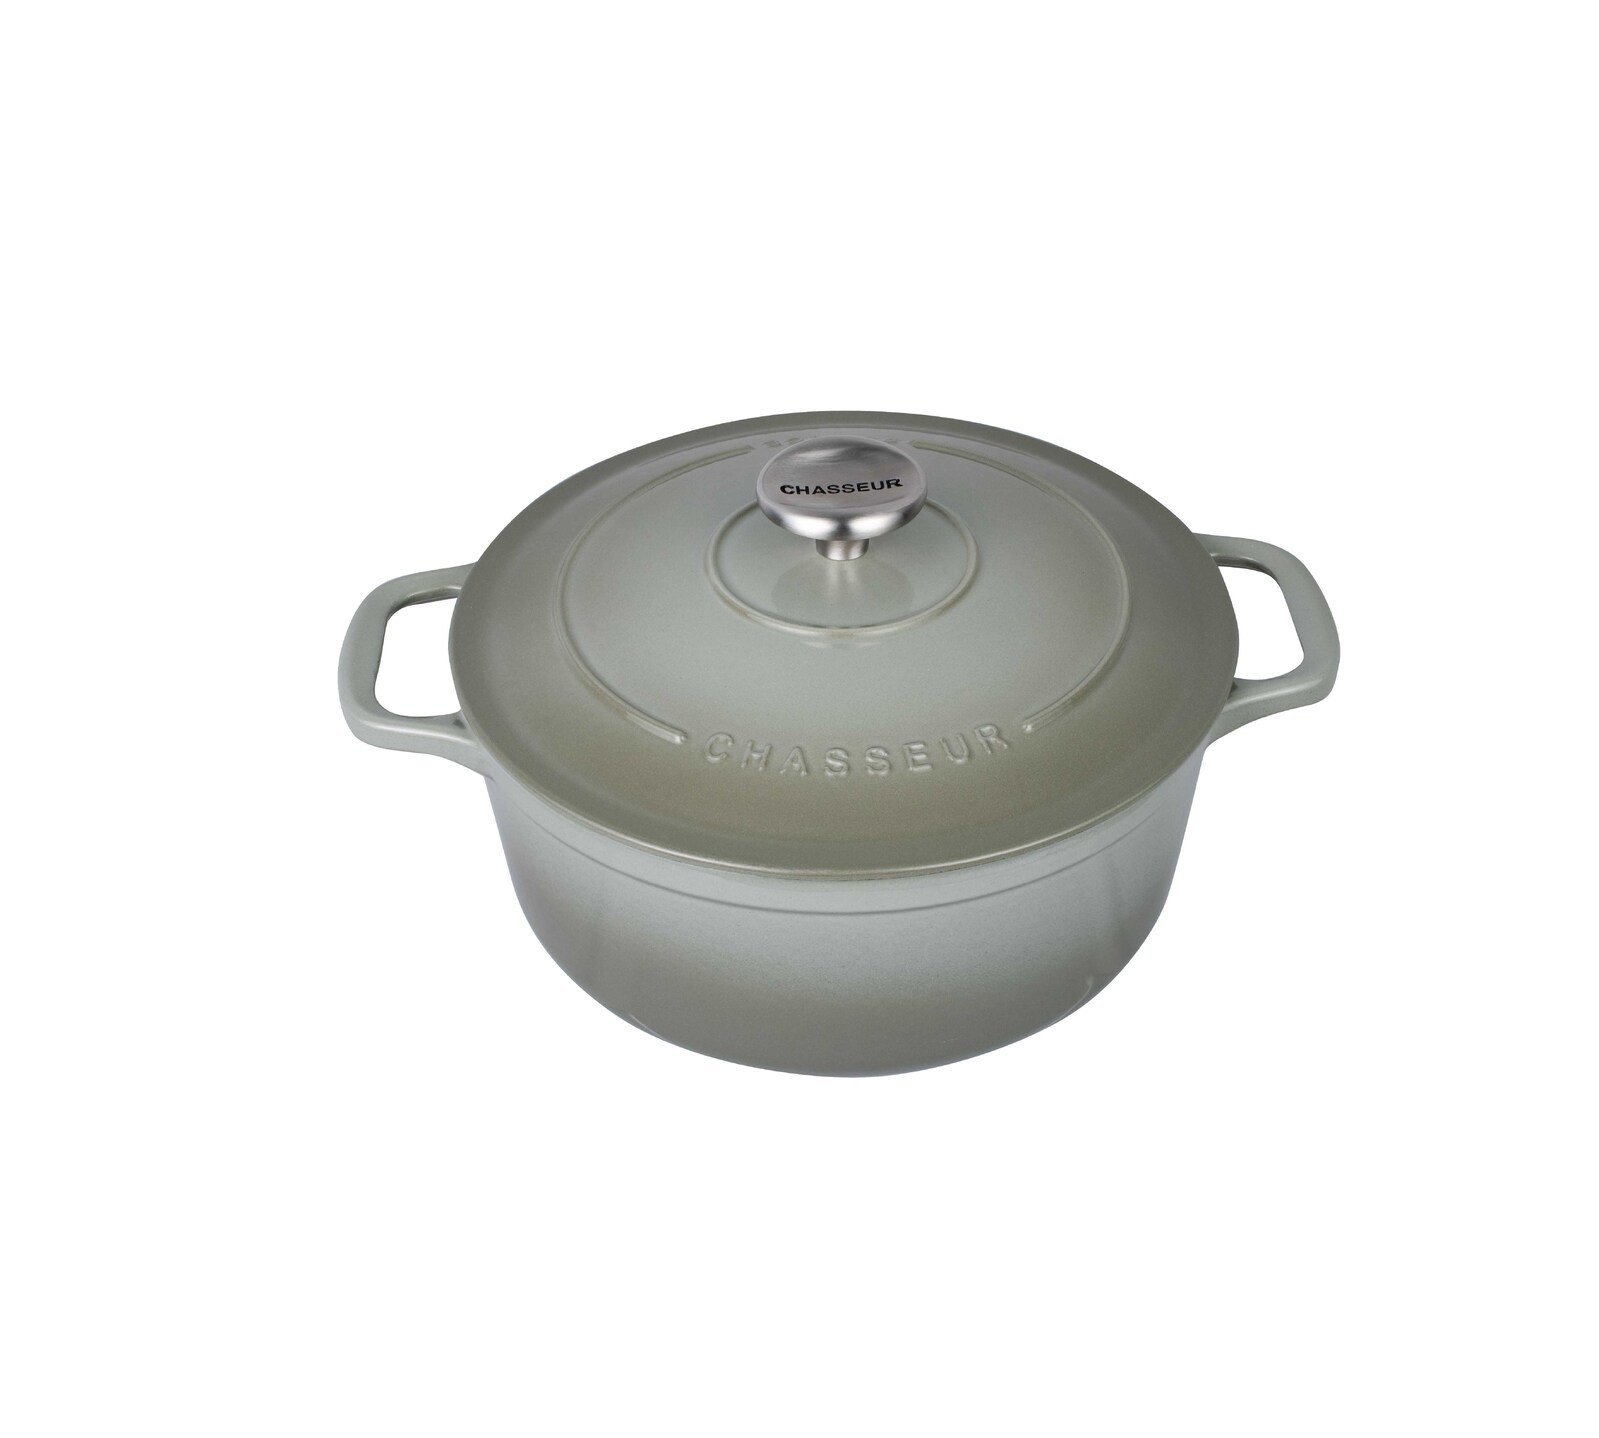 Chasseur Round French Oven 26cm/5 Litre Eucalyptus